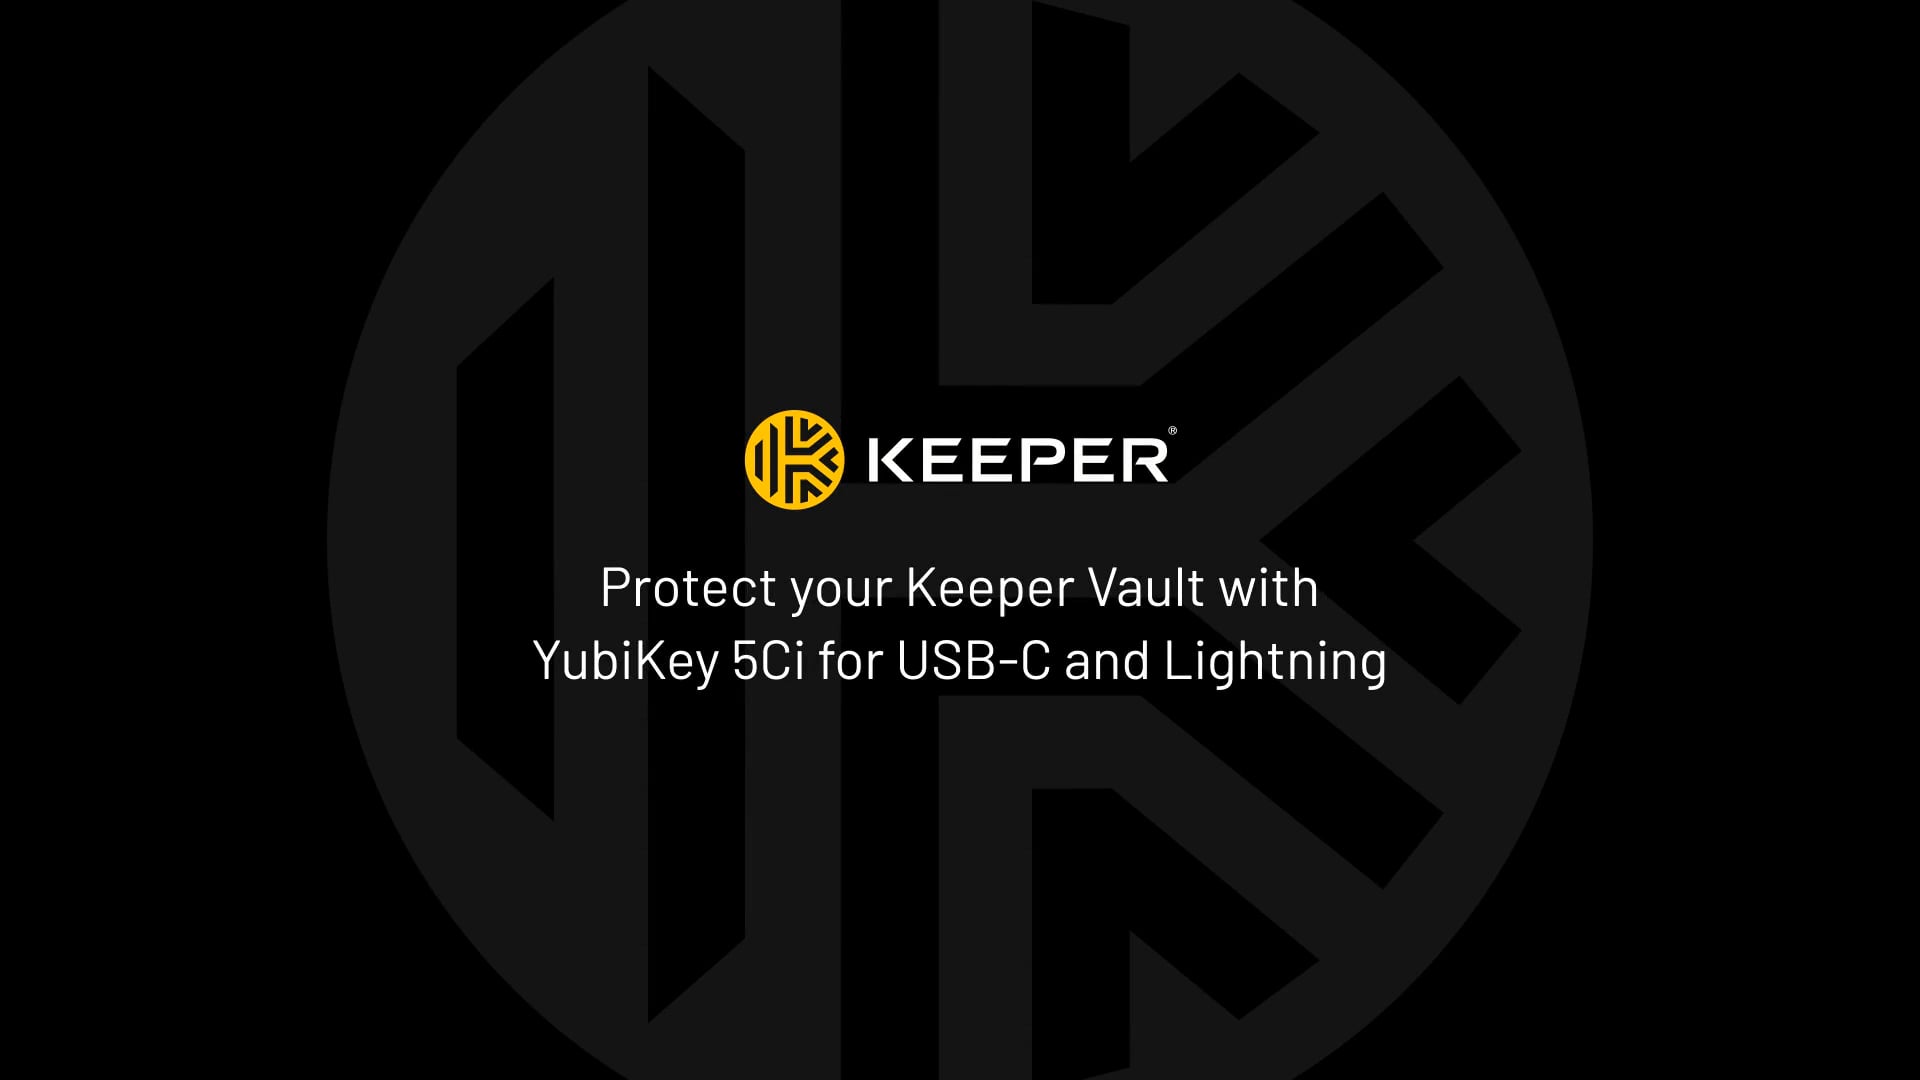 vente Tale forsigtigt Protect your Keeper Vault with YubiKey 5Ci for USB-C Lightning on Vimeo